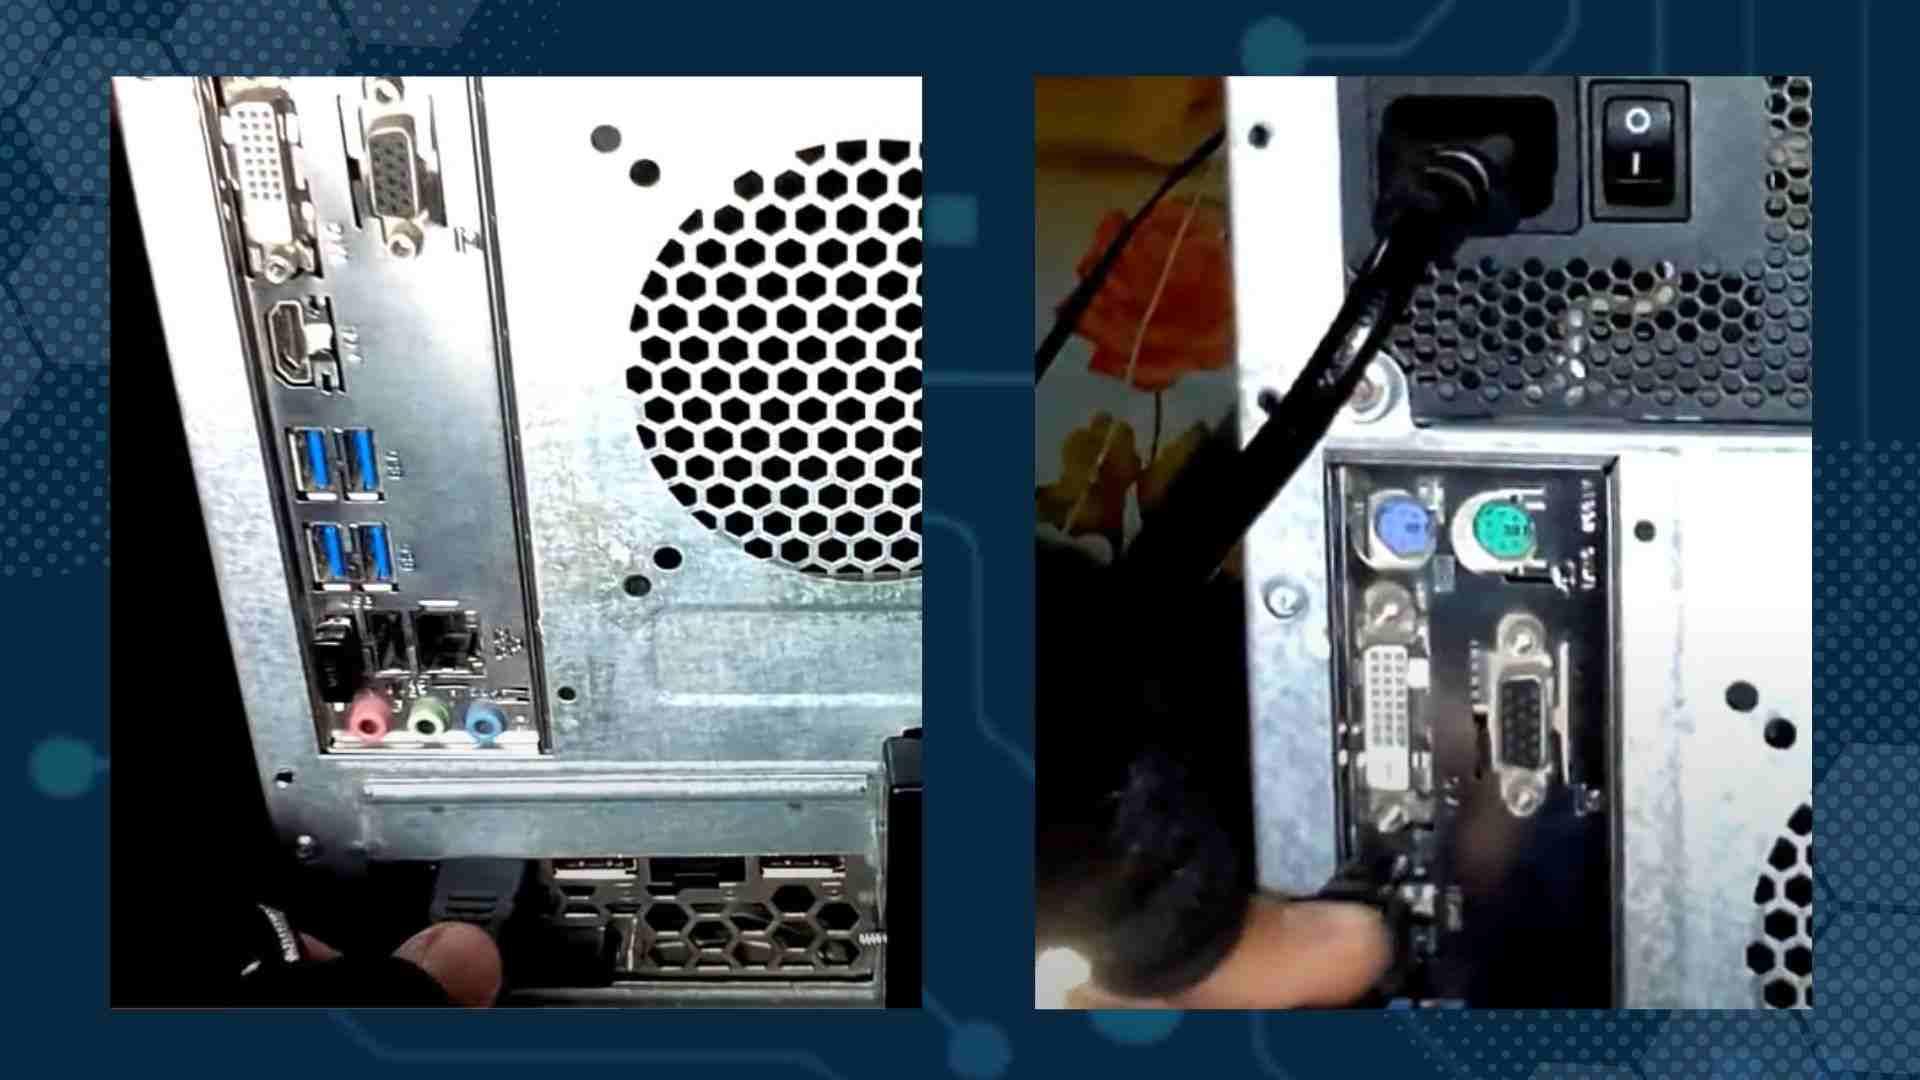 Method # 4: Move Monitor Cable from GPU to Motherboard